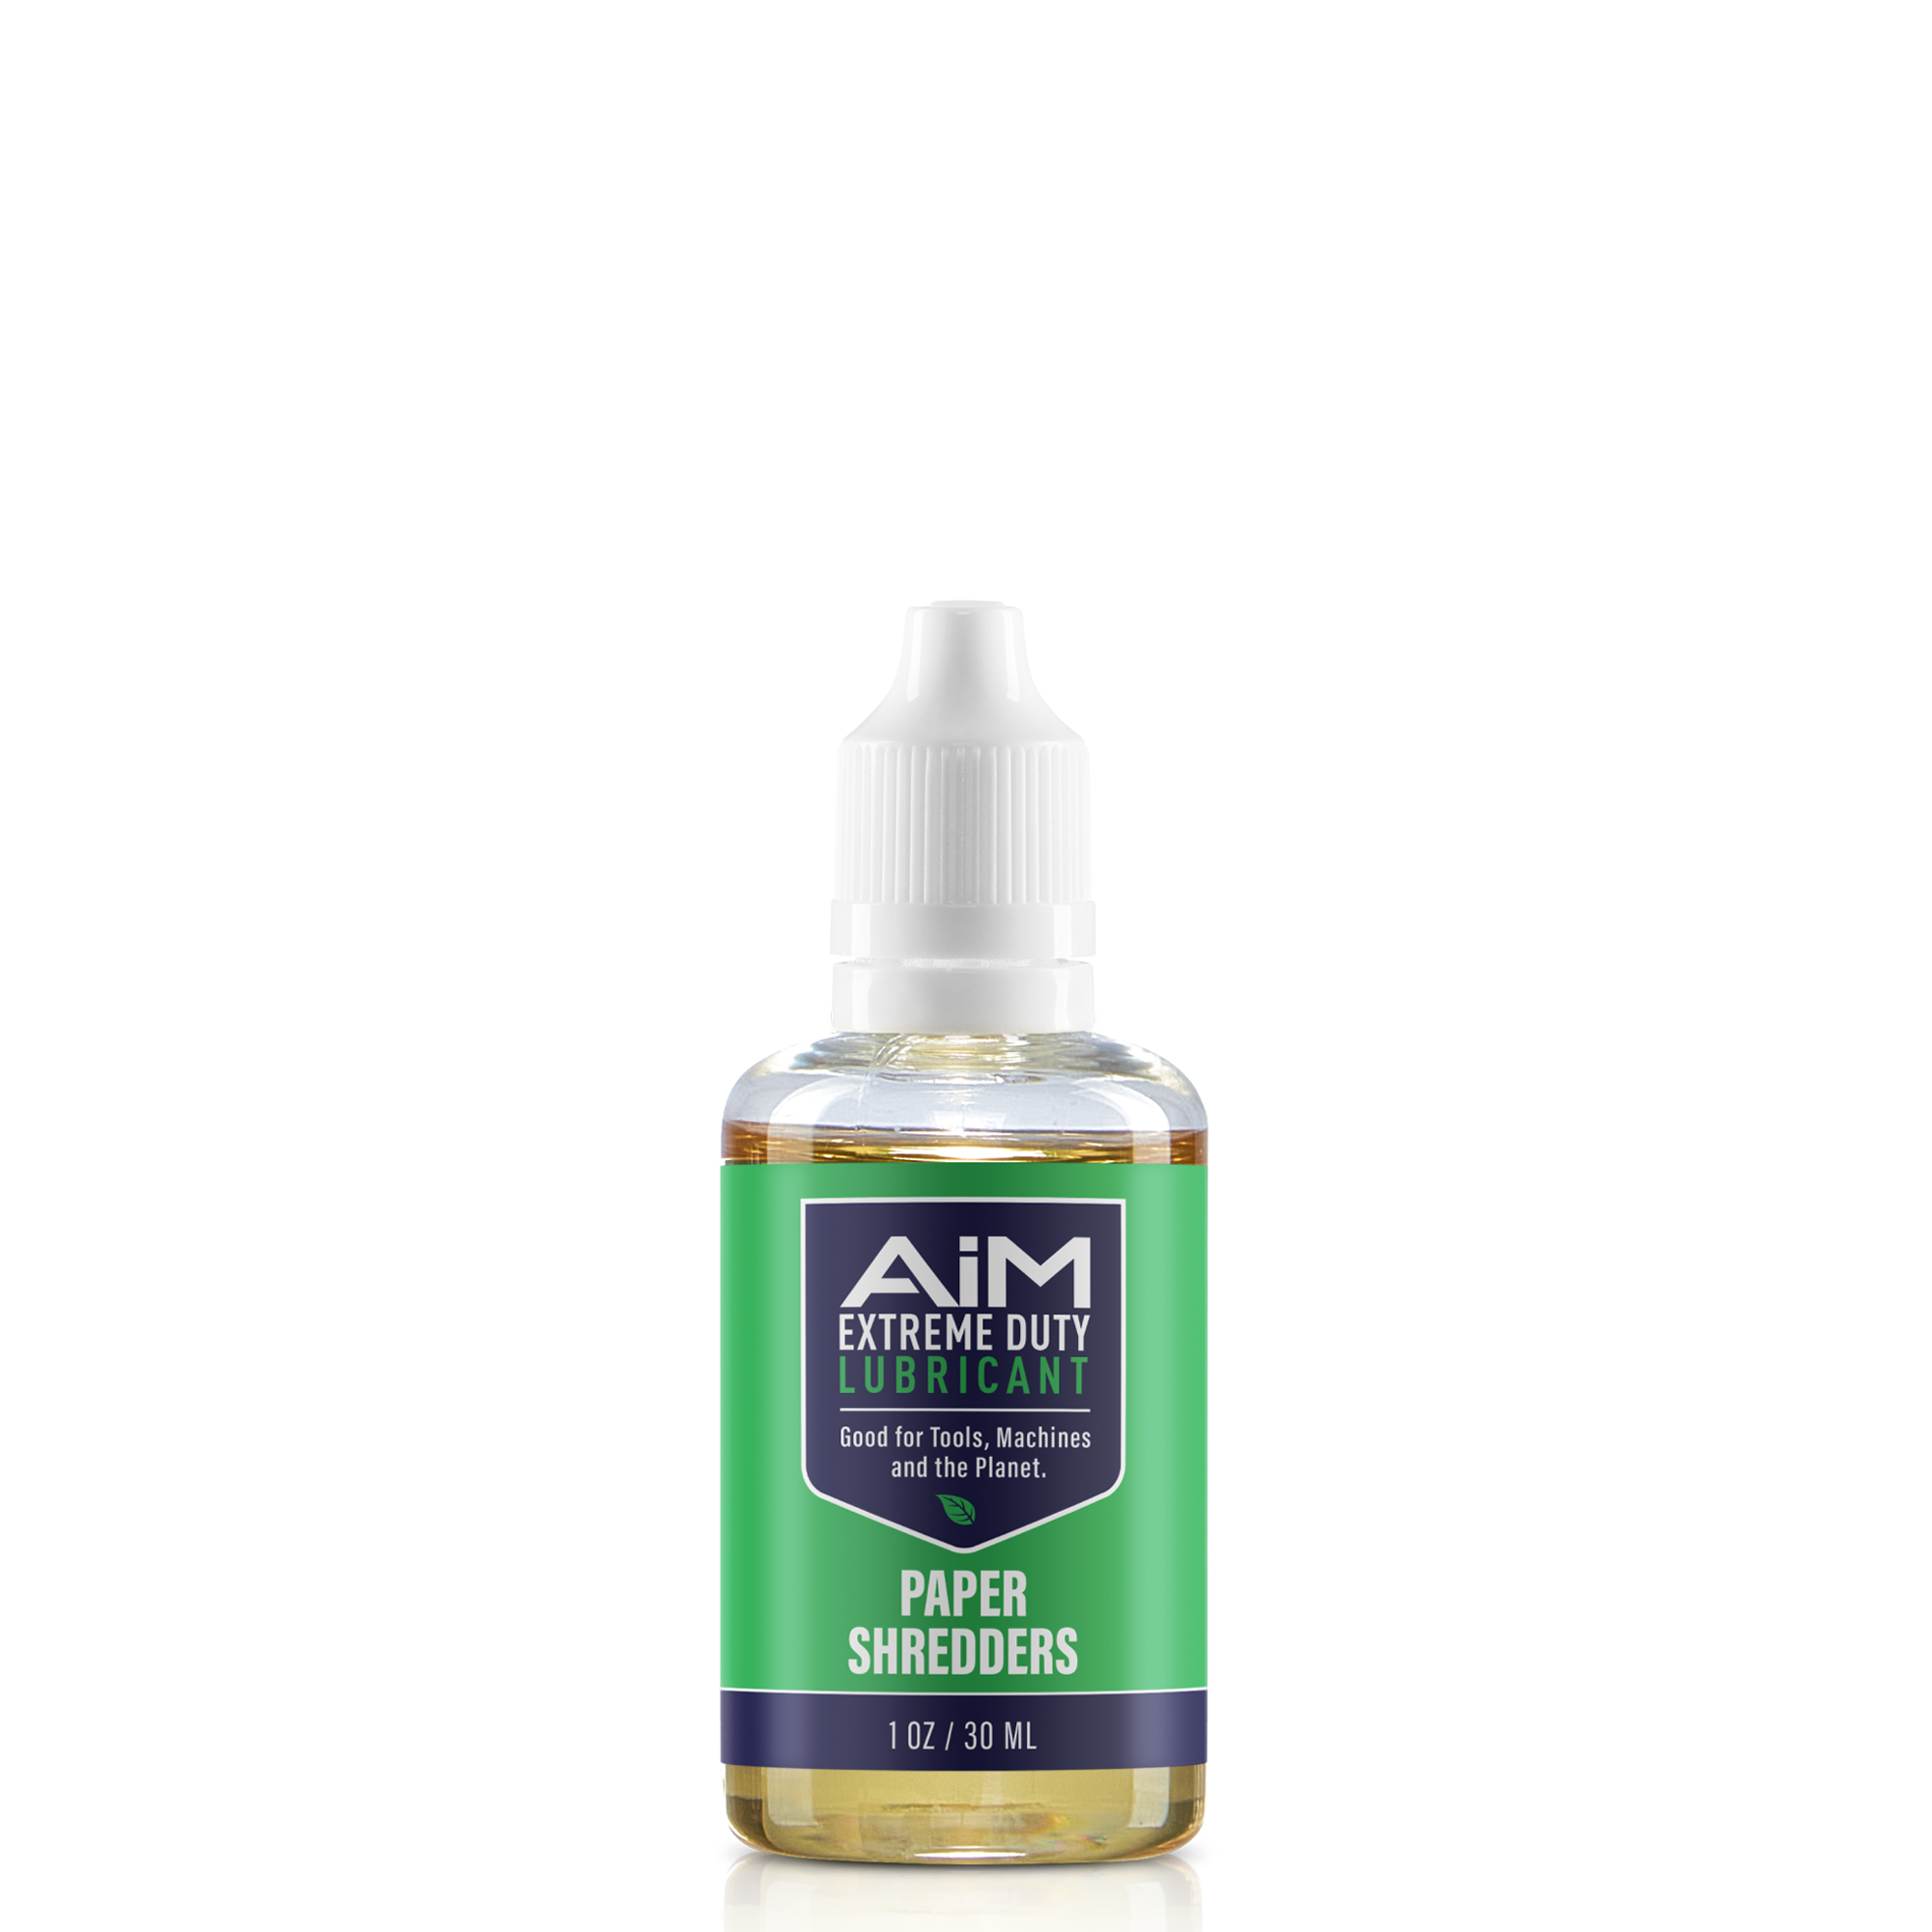 AiM Extreme Duty Lubricant | Office and Paper Shredder Oil | Specialty | 1 oz precision